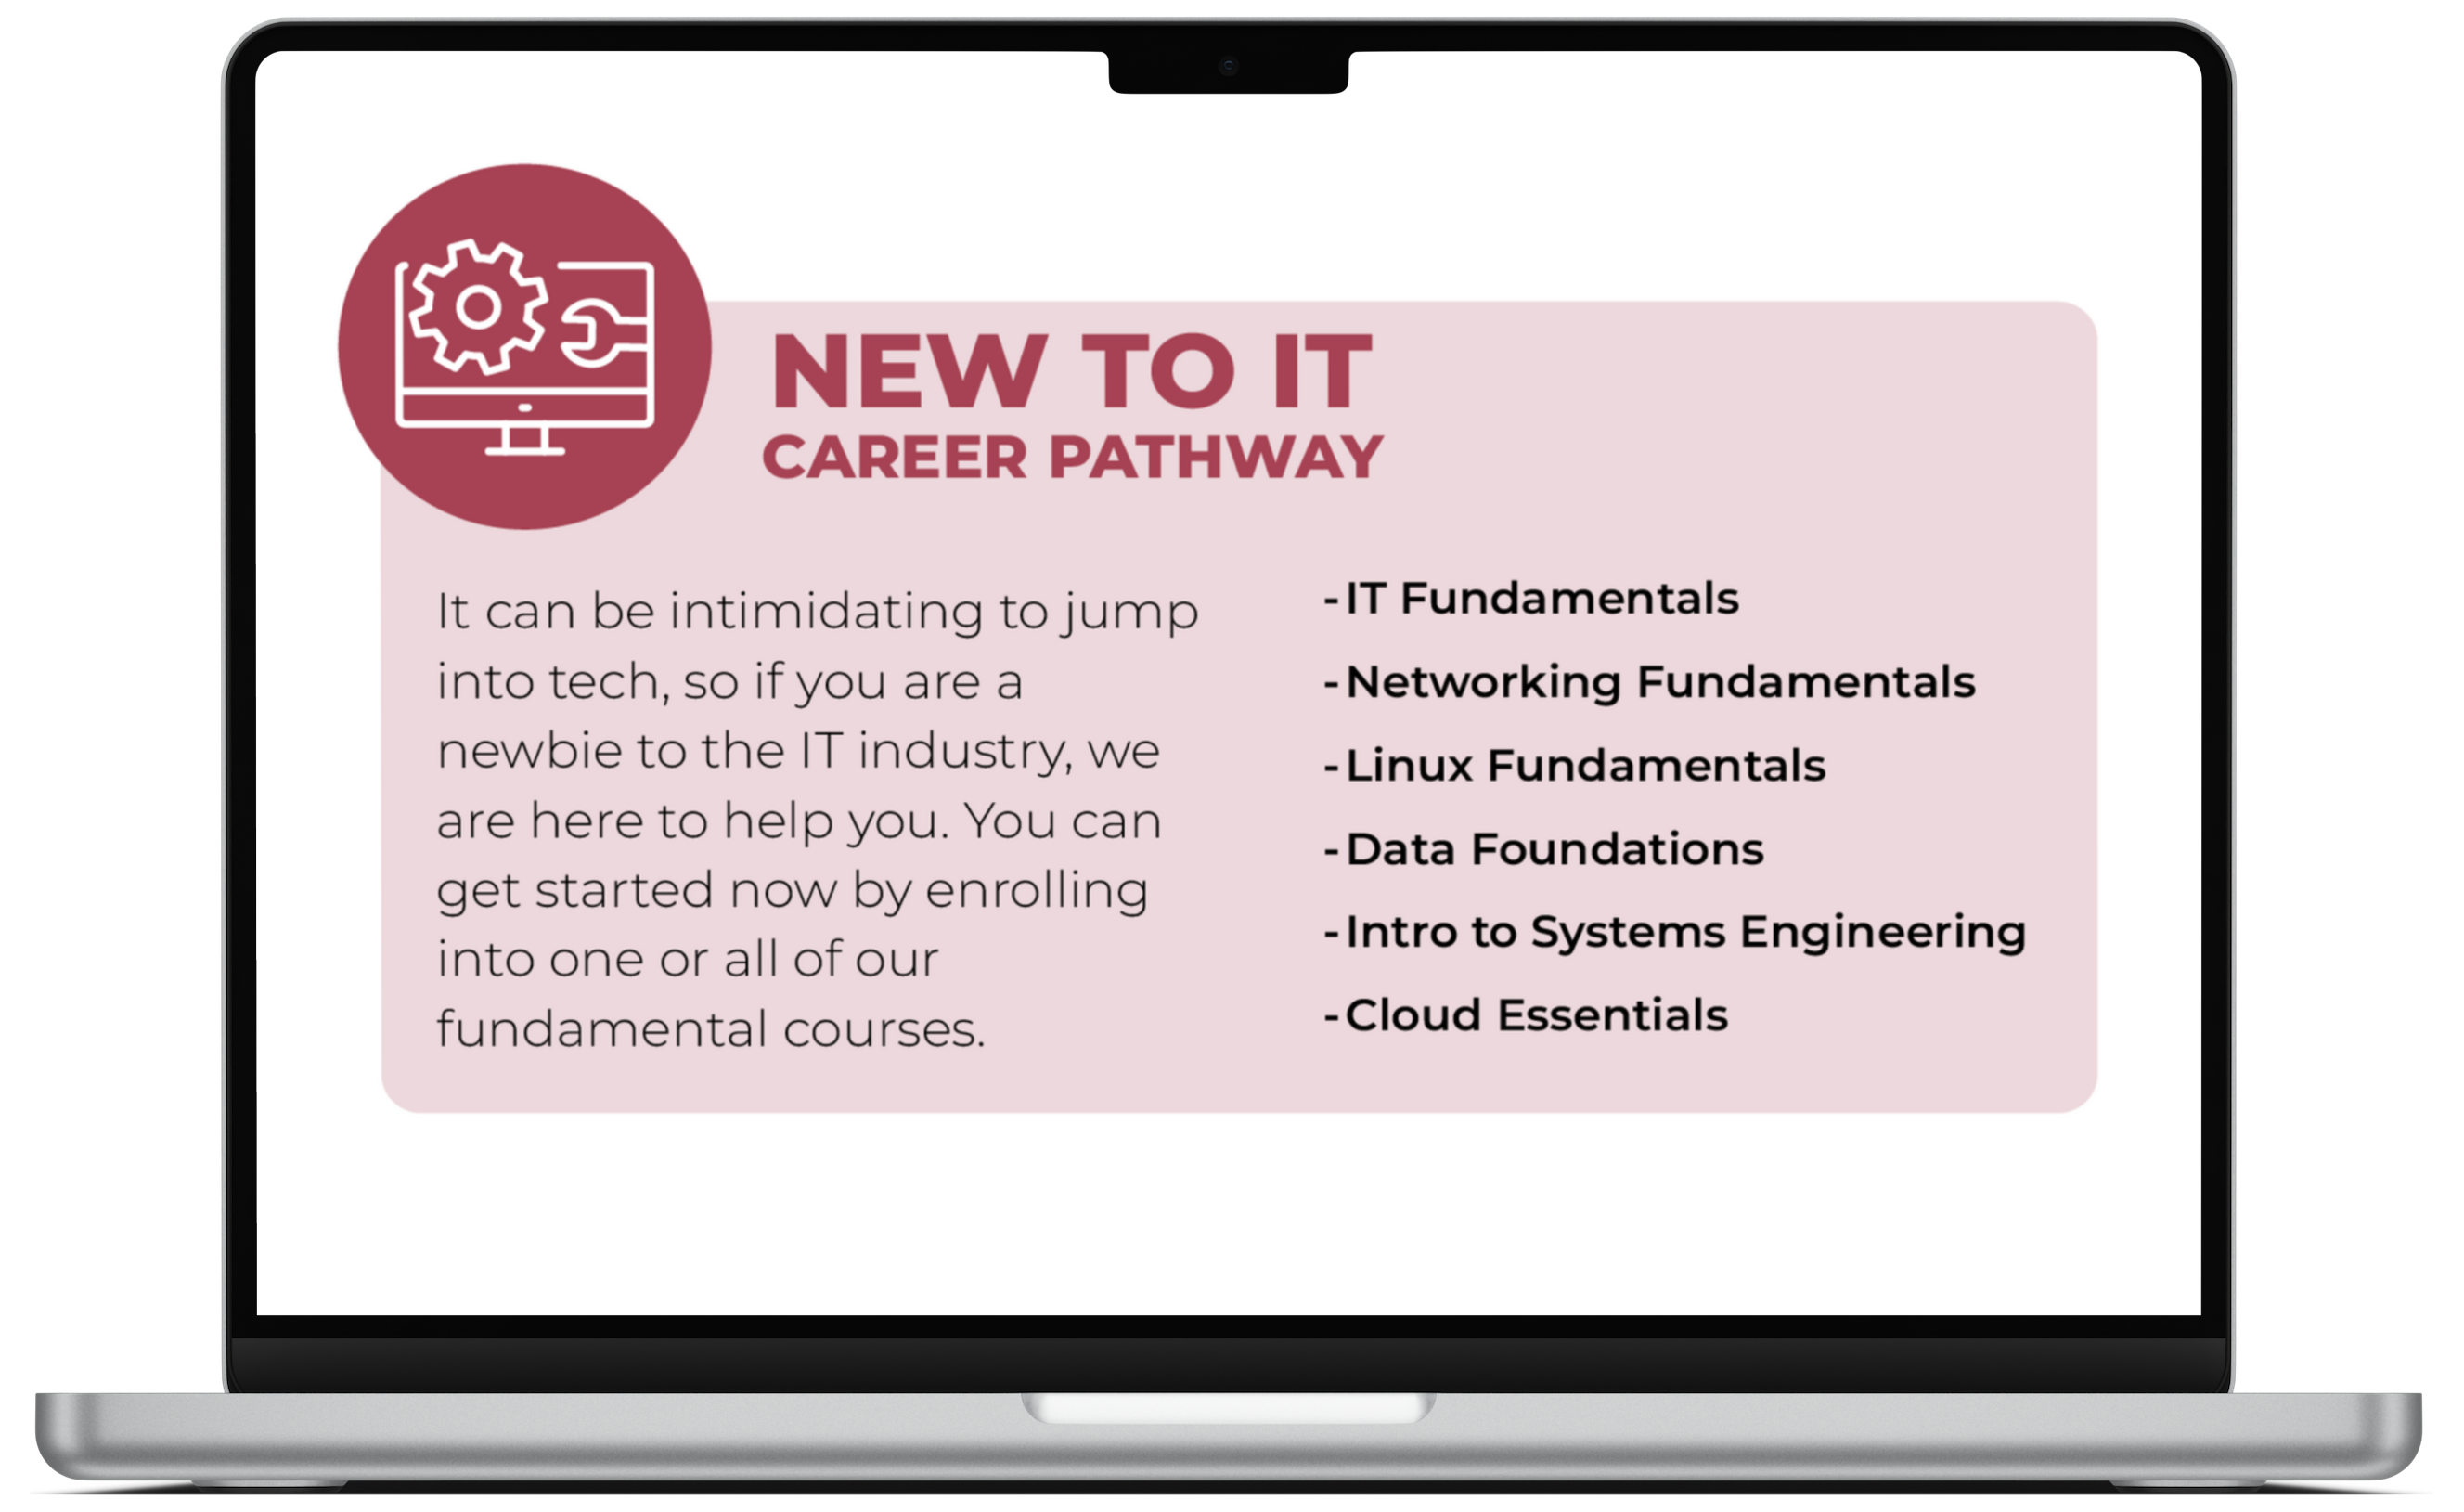 Career pathway new to IT